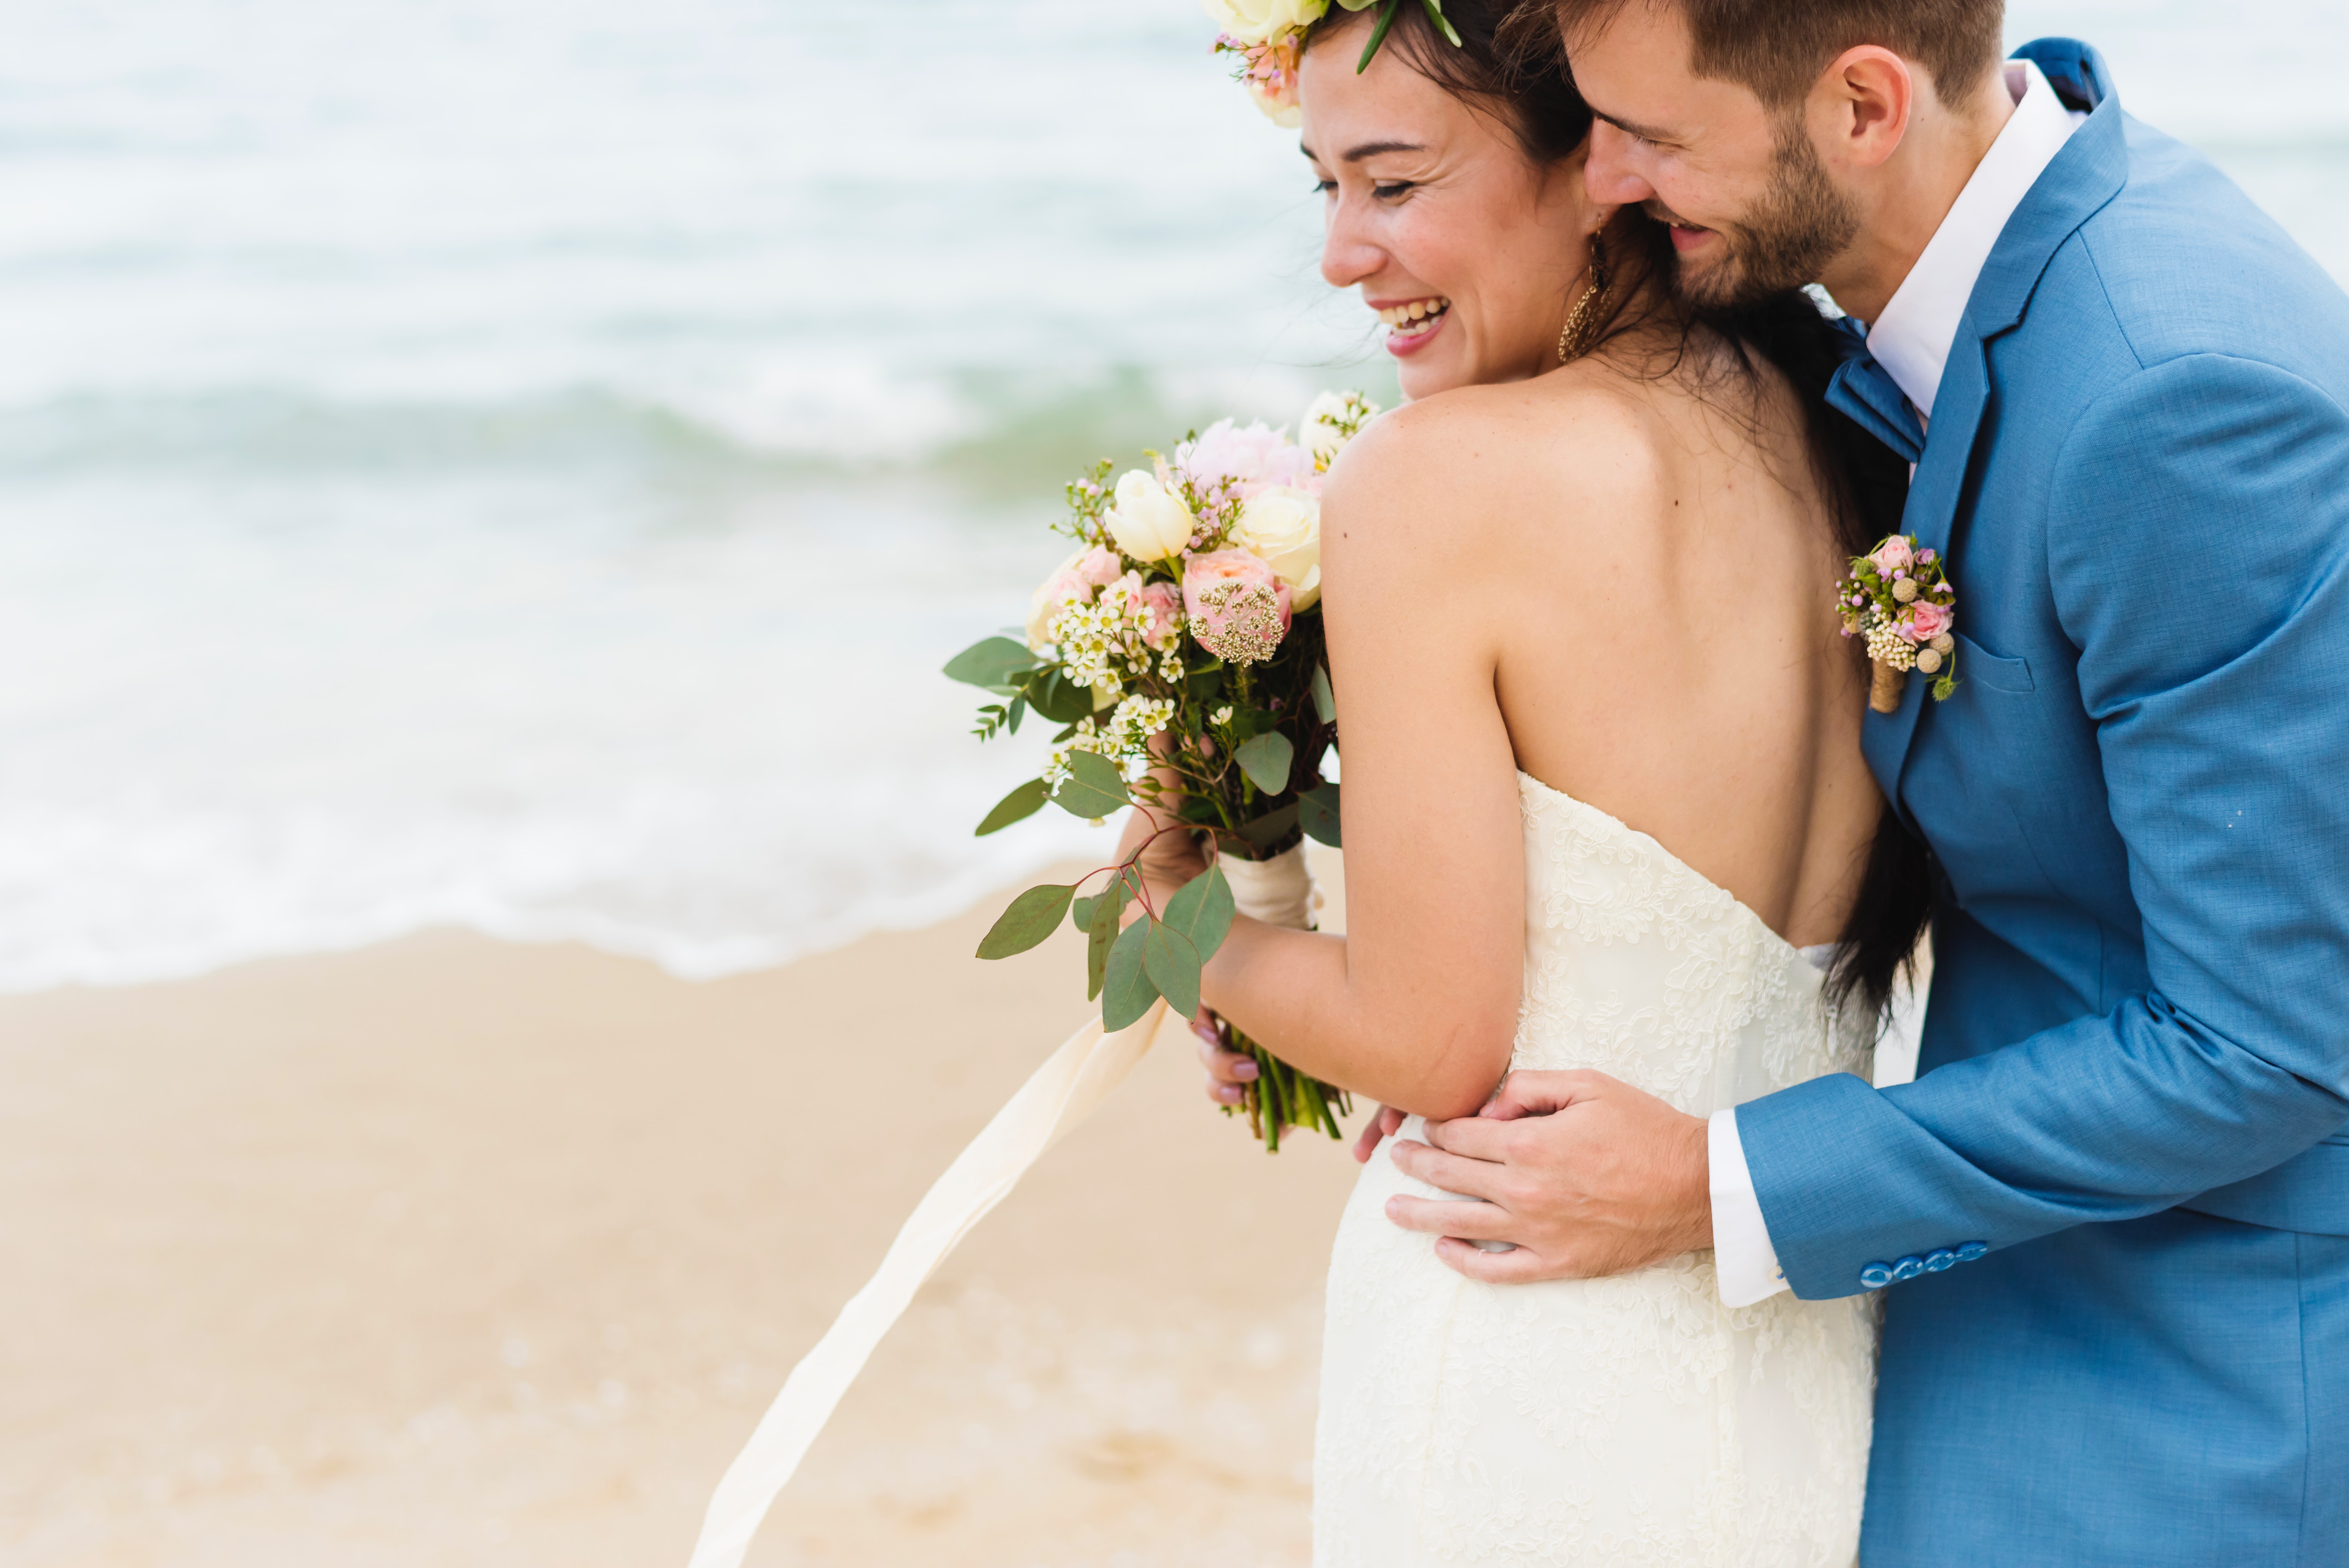 Hotel Cabana – Host The Wedding of Your Dreams on Clearwater Beach